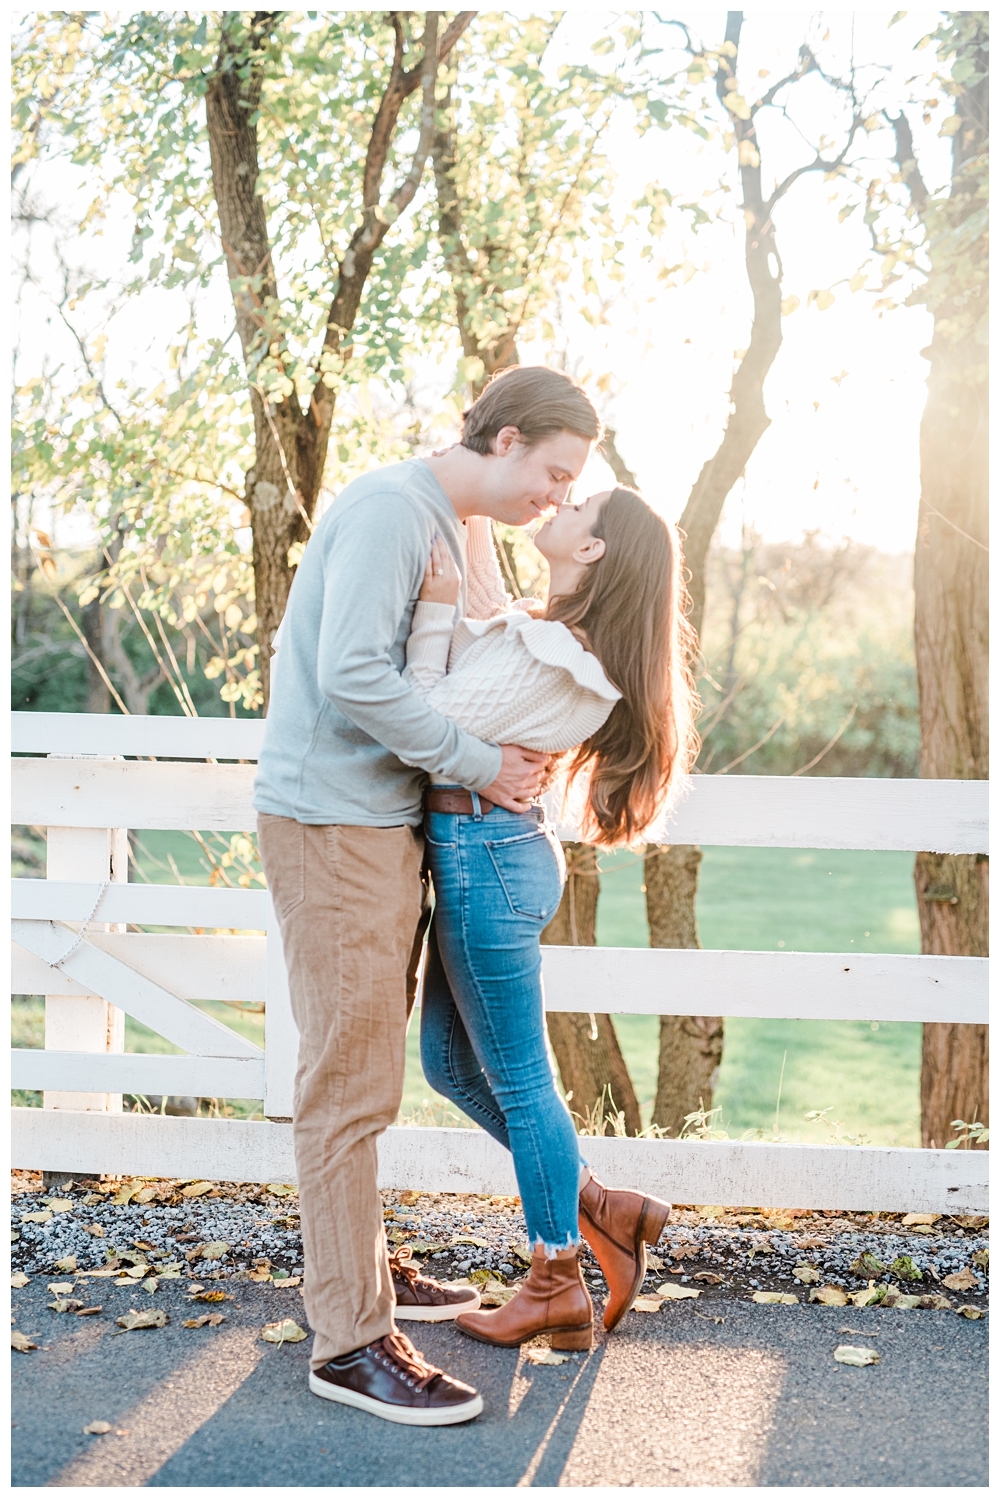 Marriage Proposal; Engagement Ring; Virginia Engagement Photographer; Fall Engagement photos; L'Auberge Provencale Bed & Breakfast; Zach & Gina;